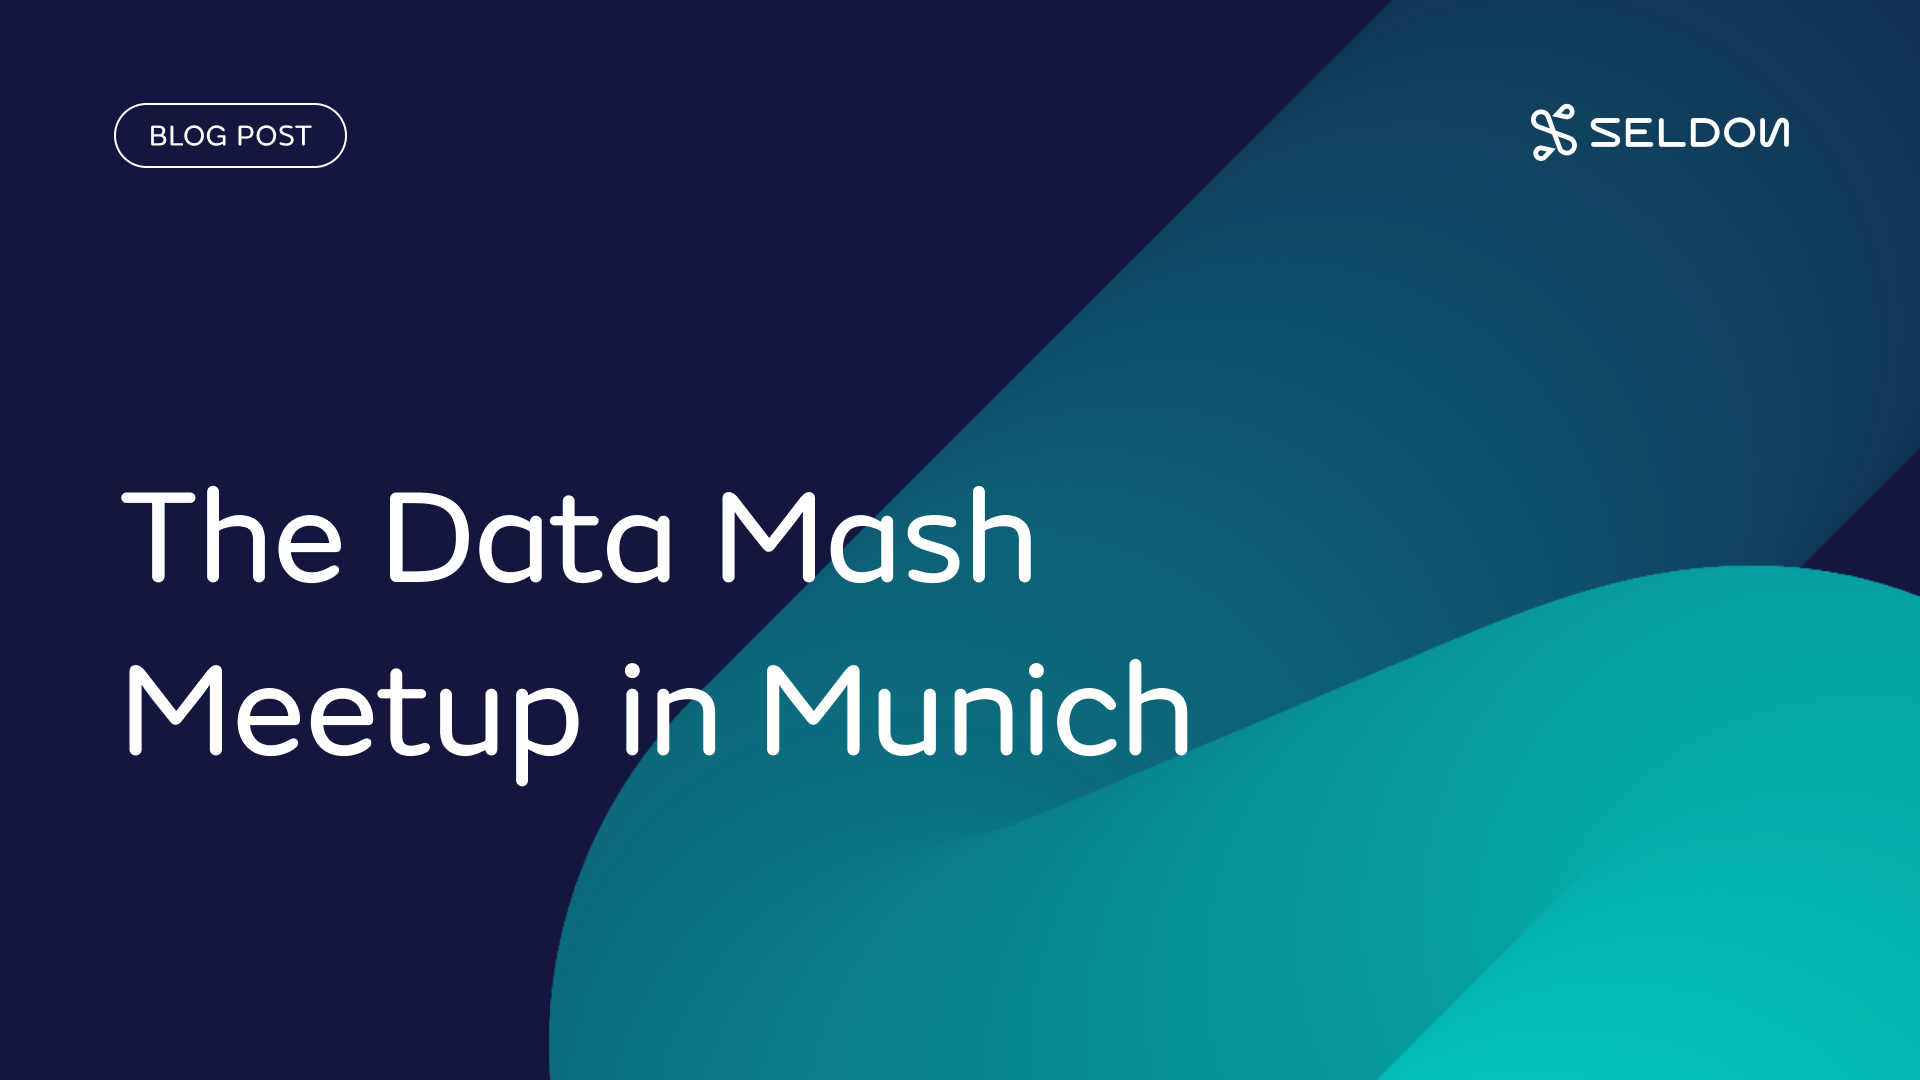 Seldon and Data Reply host the Data Mash Meetup in Munich